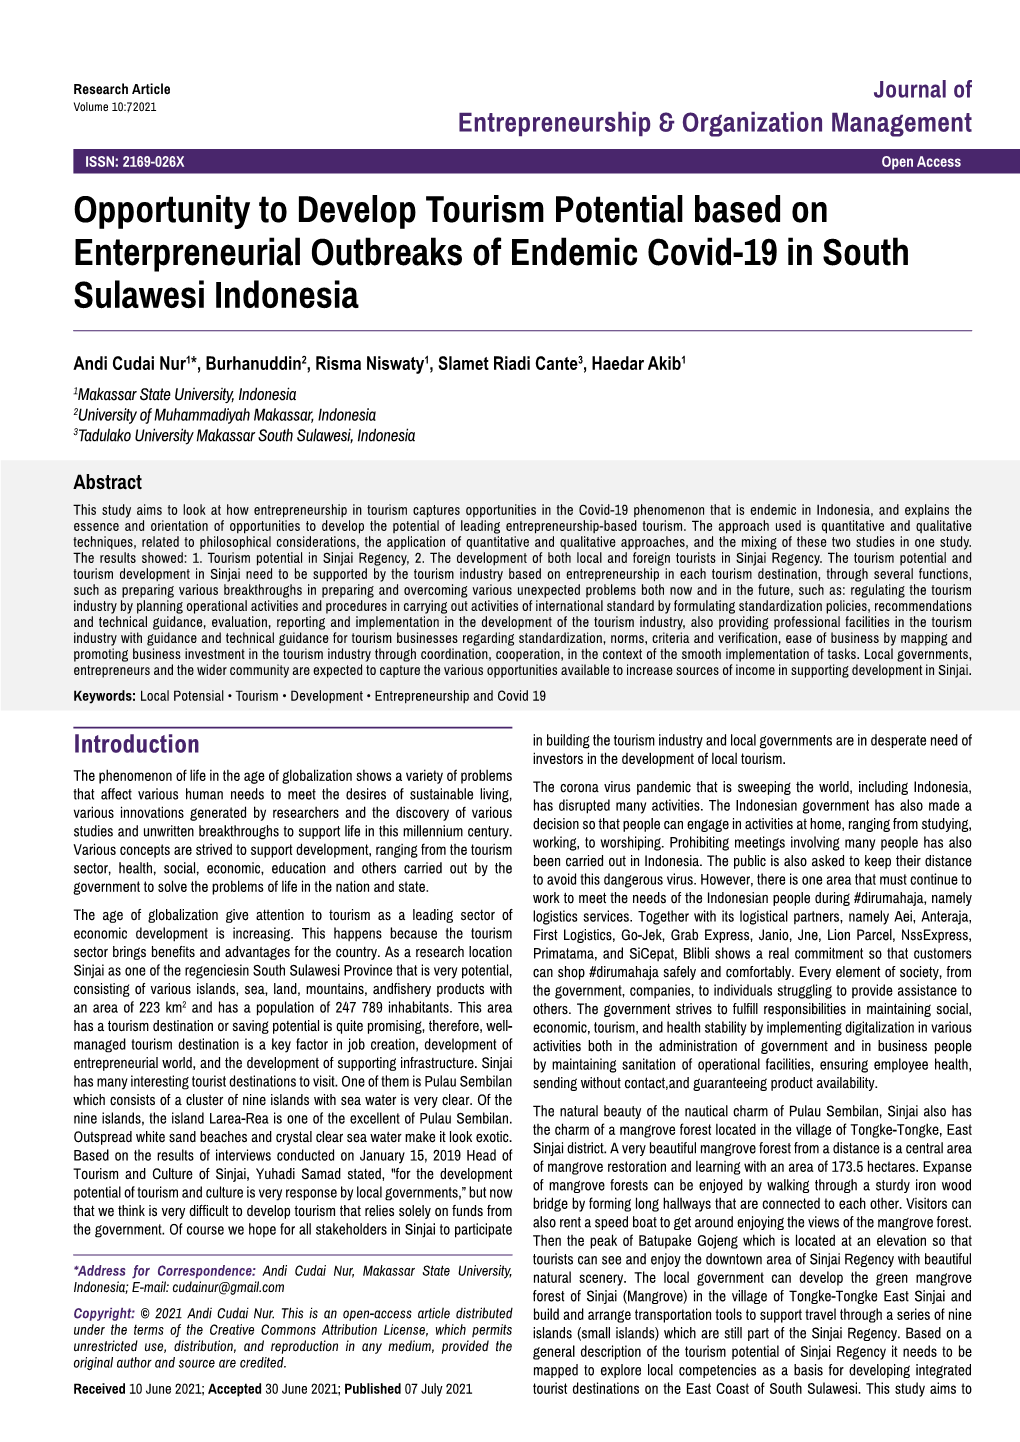 Opportunity to Develop Tourism Potential Based on Enterpreneurial Outbreaks of Endemic Covid-19 in South Sulawesi Indonesia